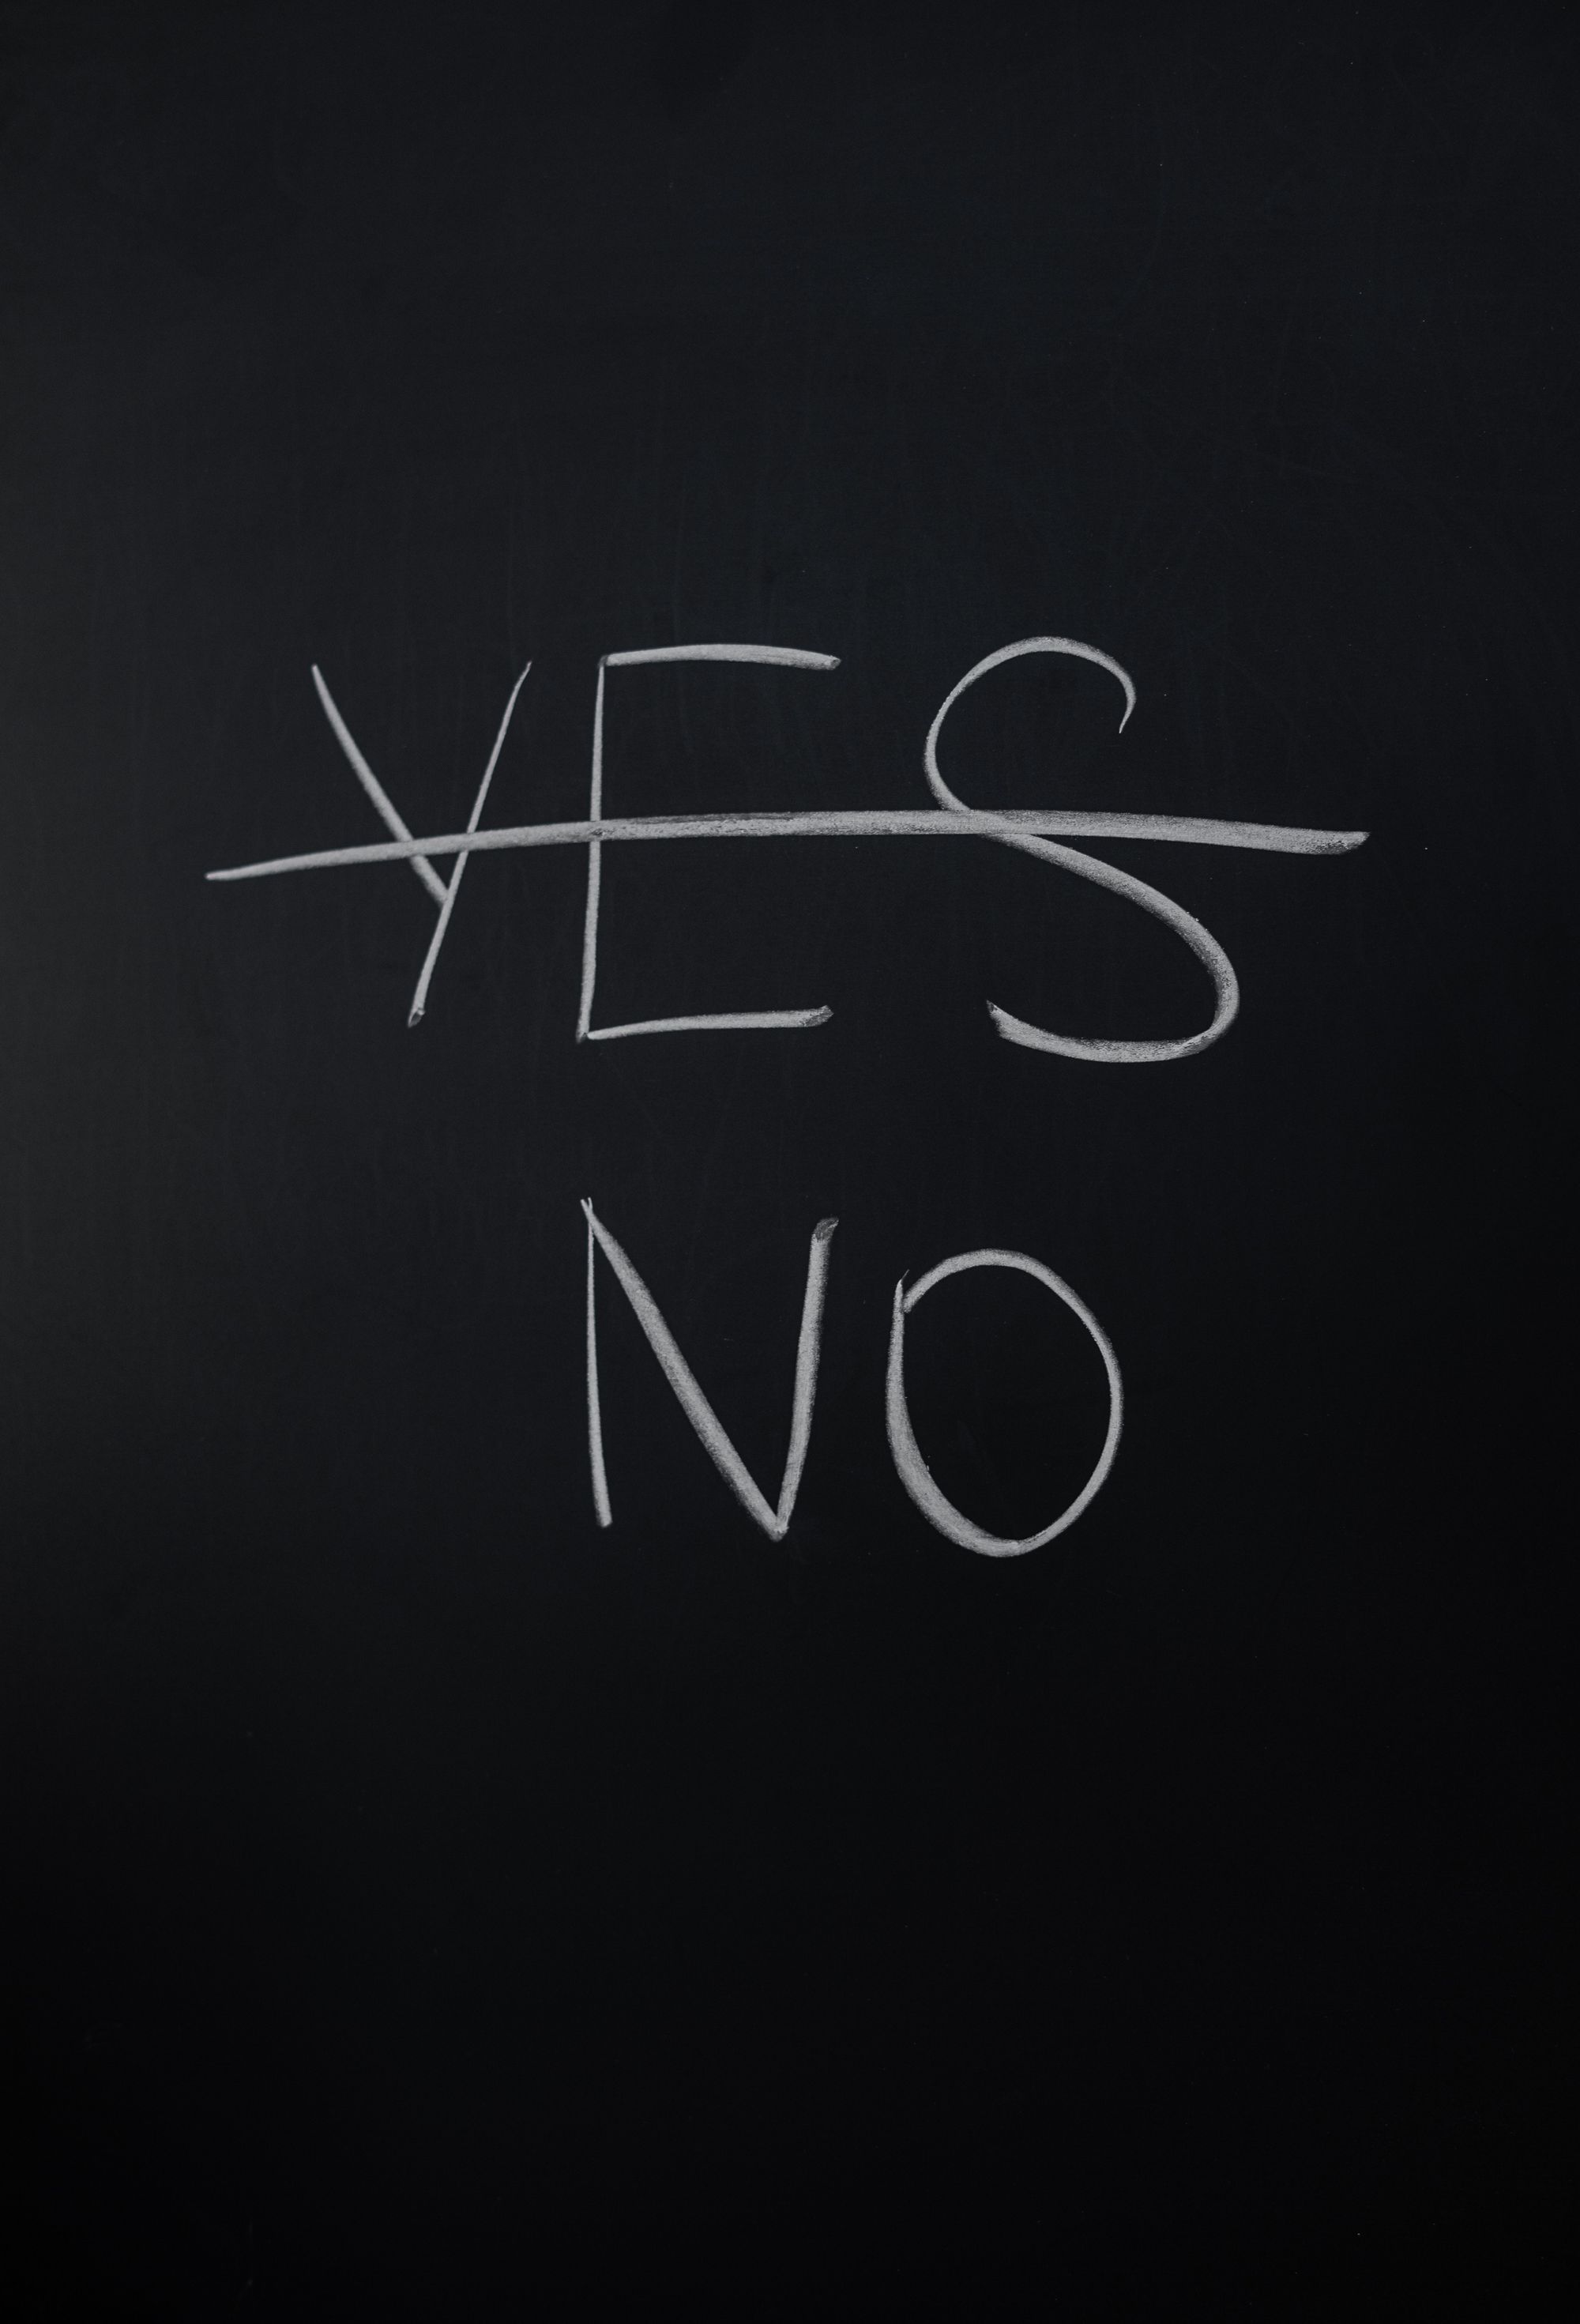 A chalkboard with the word "yes" crossed out and replaced with "no"